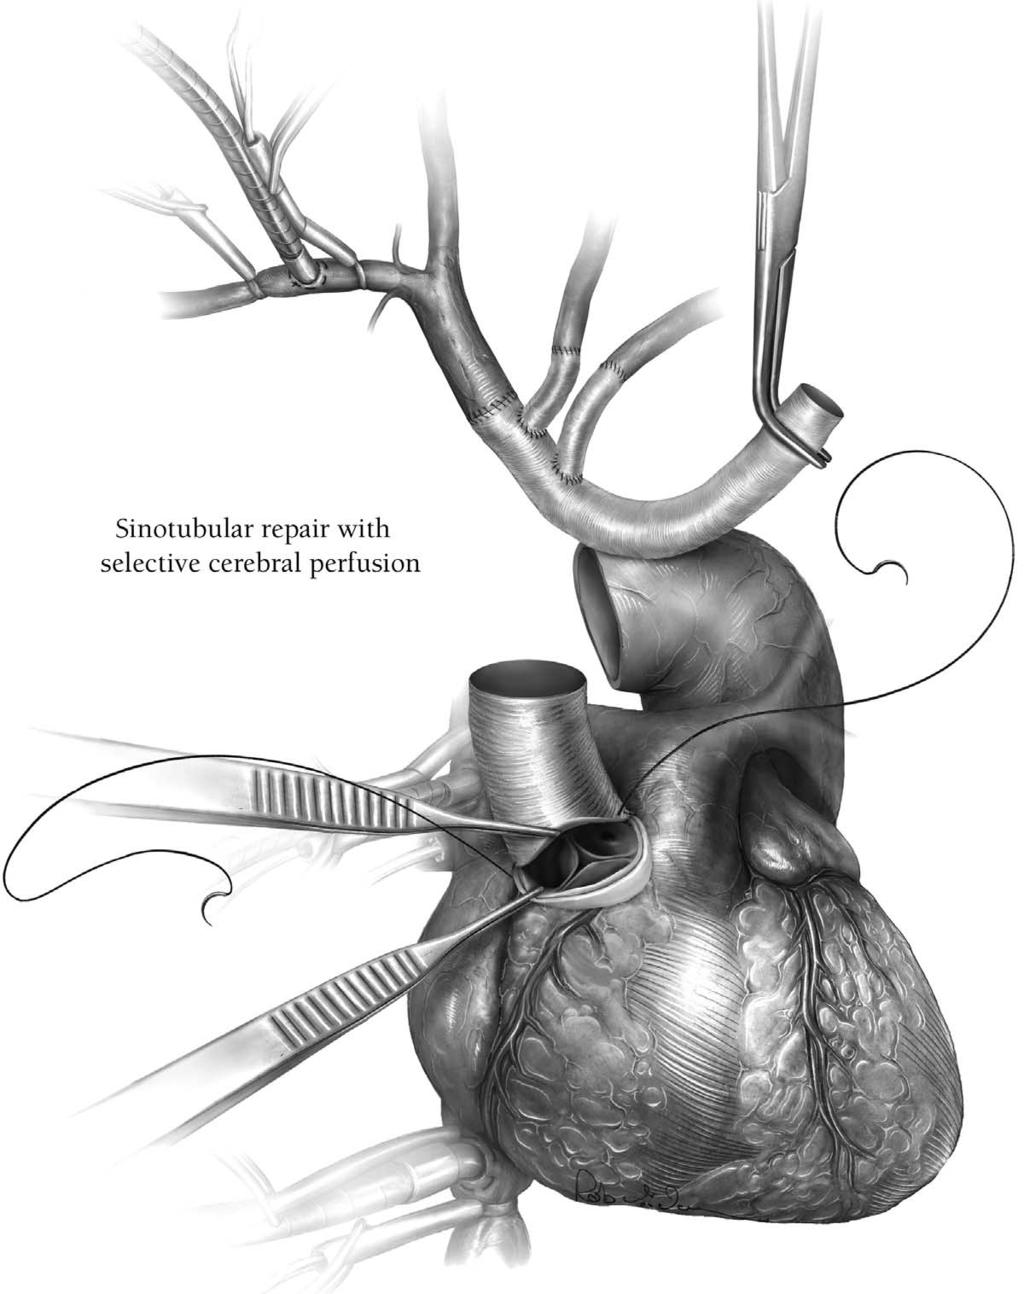 Aortic arch replacement/selective antegrade perfusion 37 Figure 14 Total aortic arch replacement for acute type A aortic dissection.